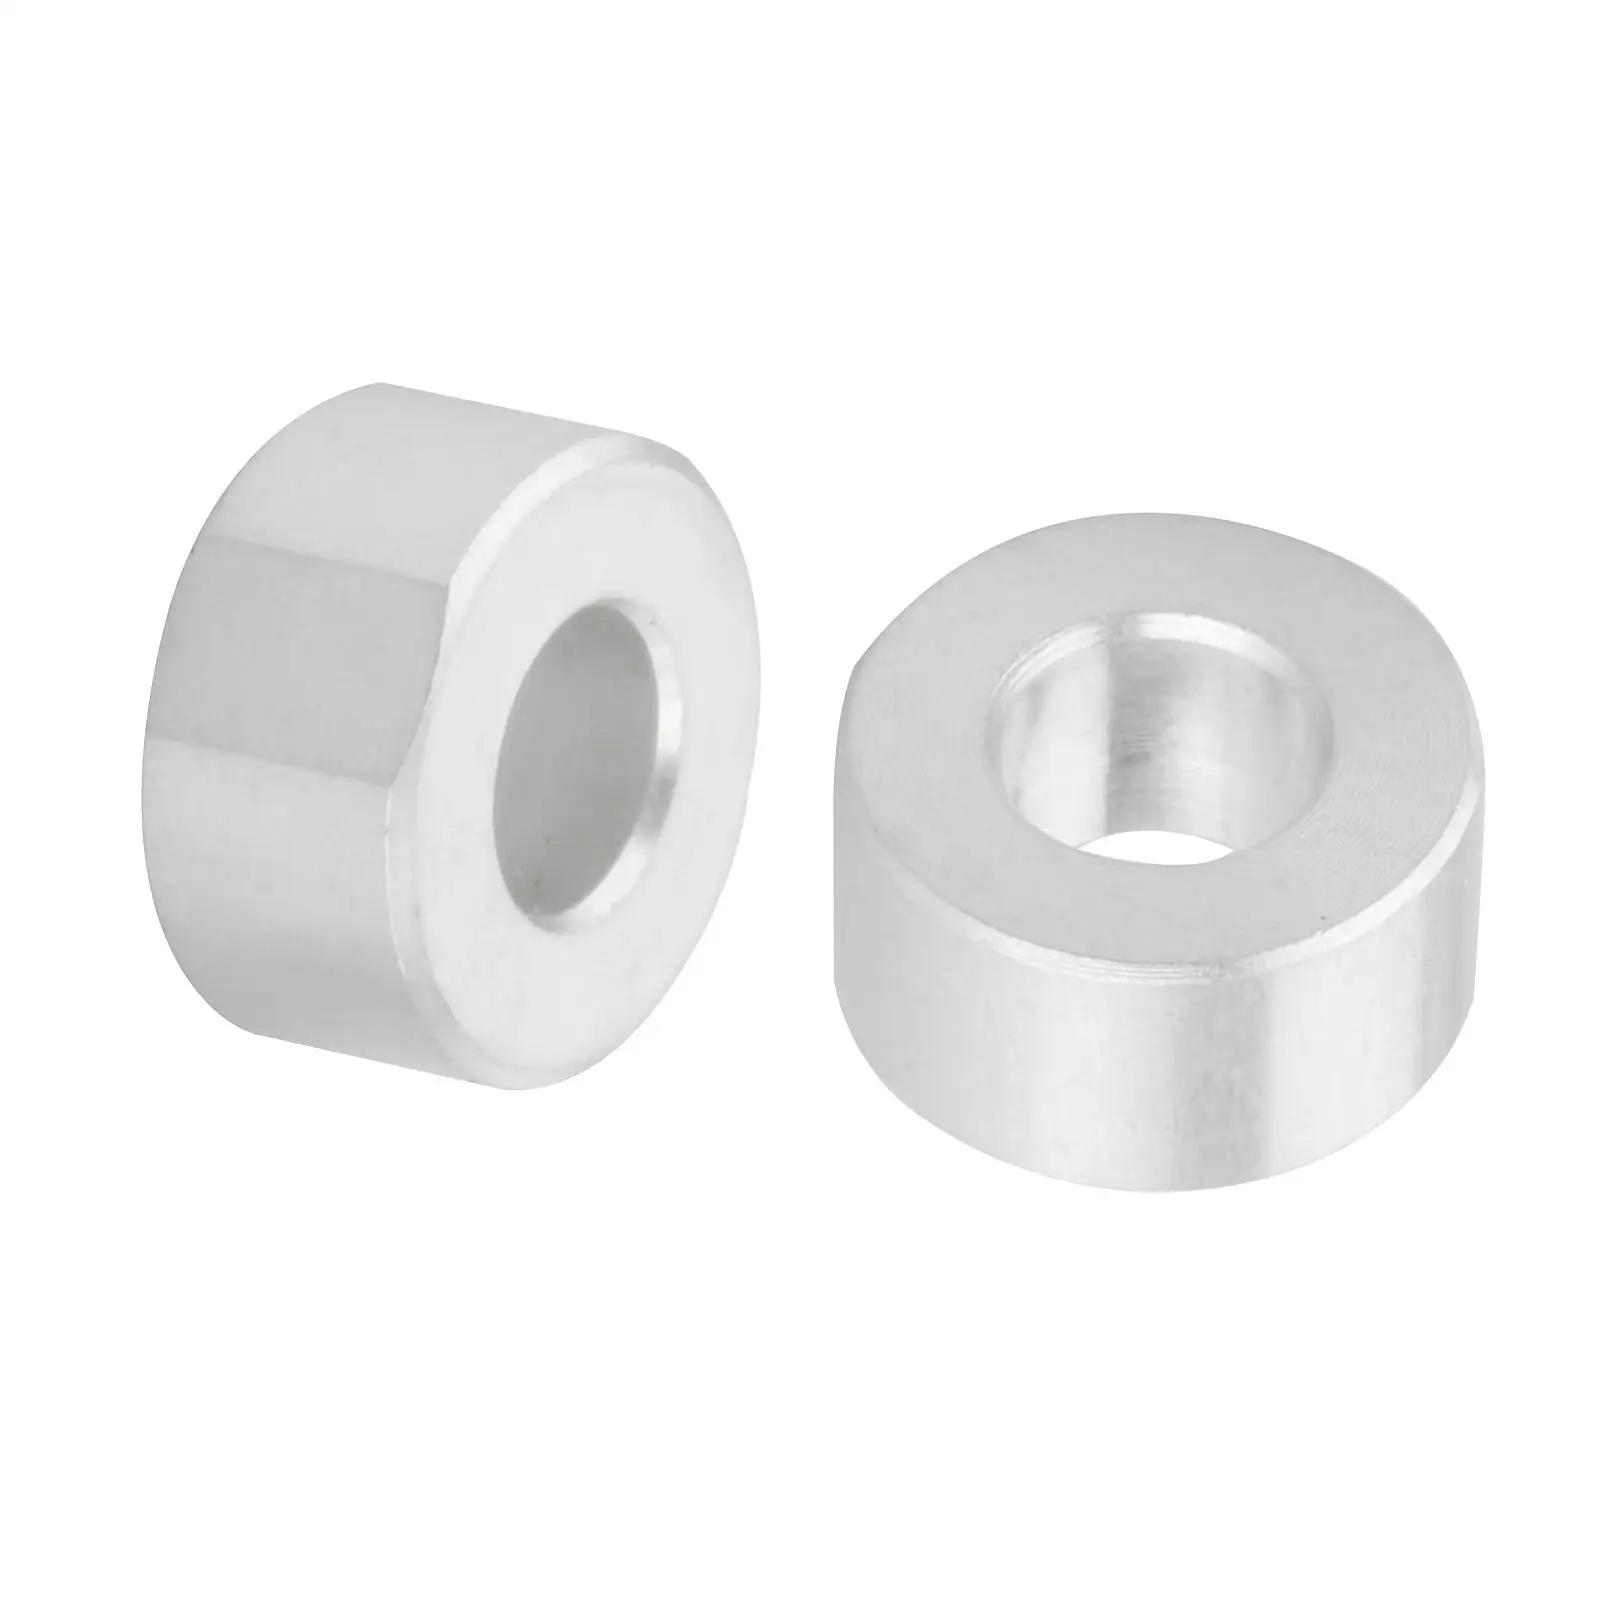 Limiter Bushing 10 & 14 Fits for Msd Pro-Billet Premium Professional Replacement